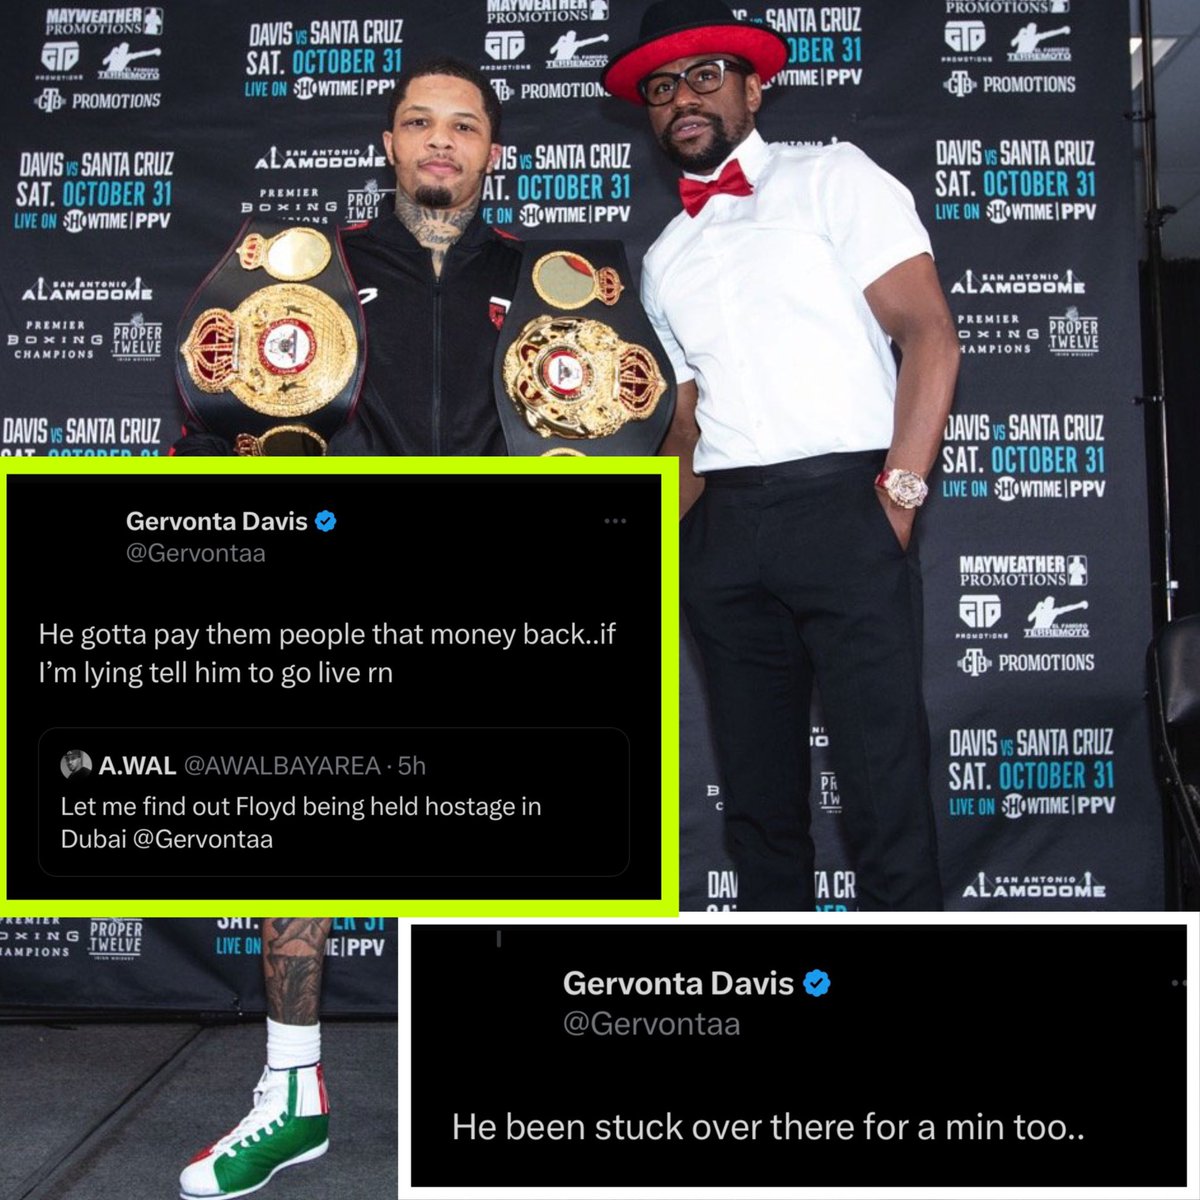 Gervonta Davis claims that Floyd Mayweather can’t leave Dubai.

#fightclub247 #boxing #fighter #champion #forthefans